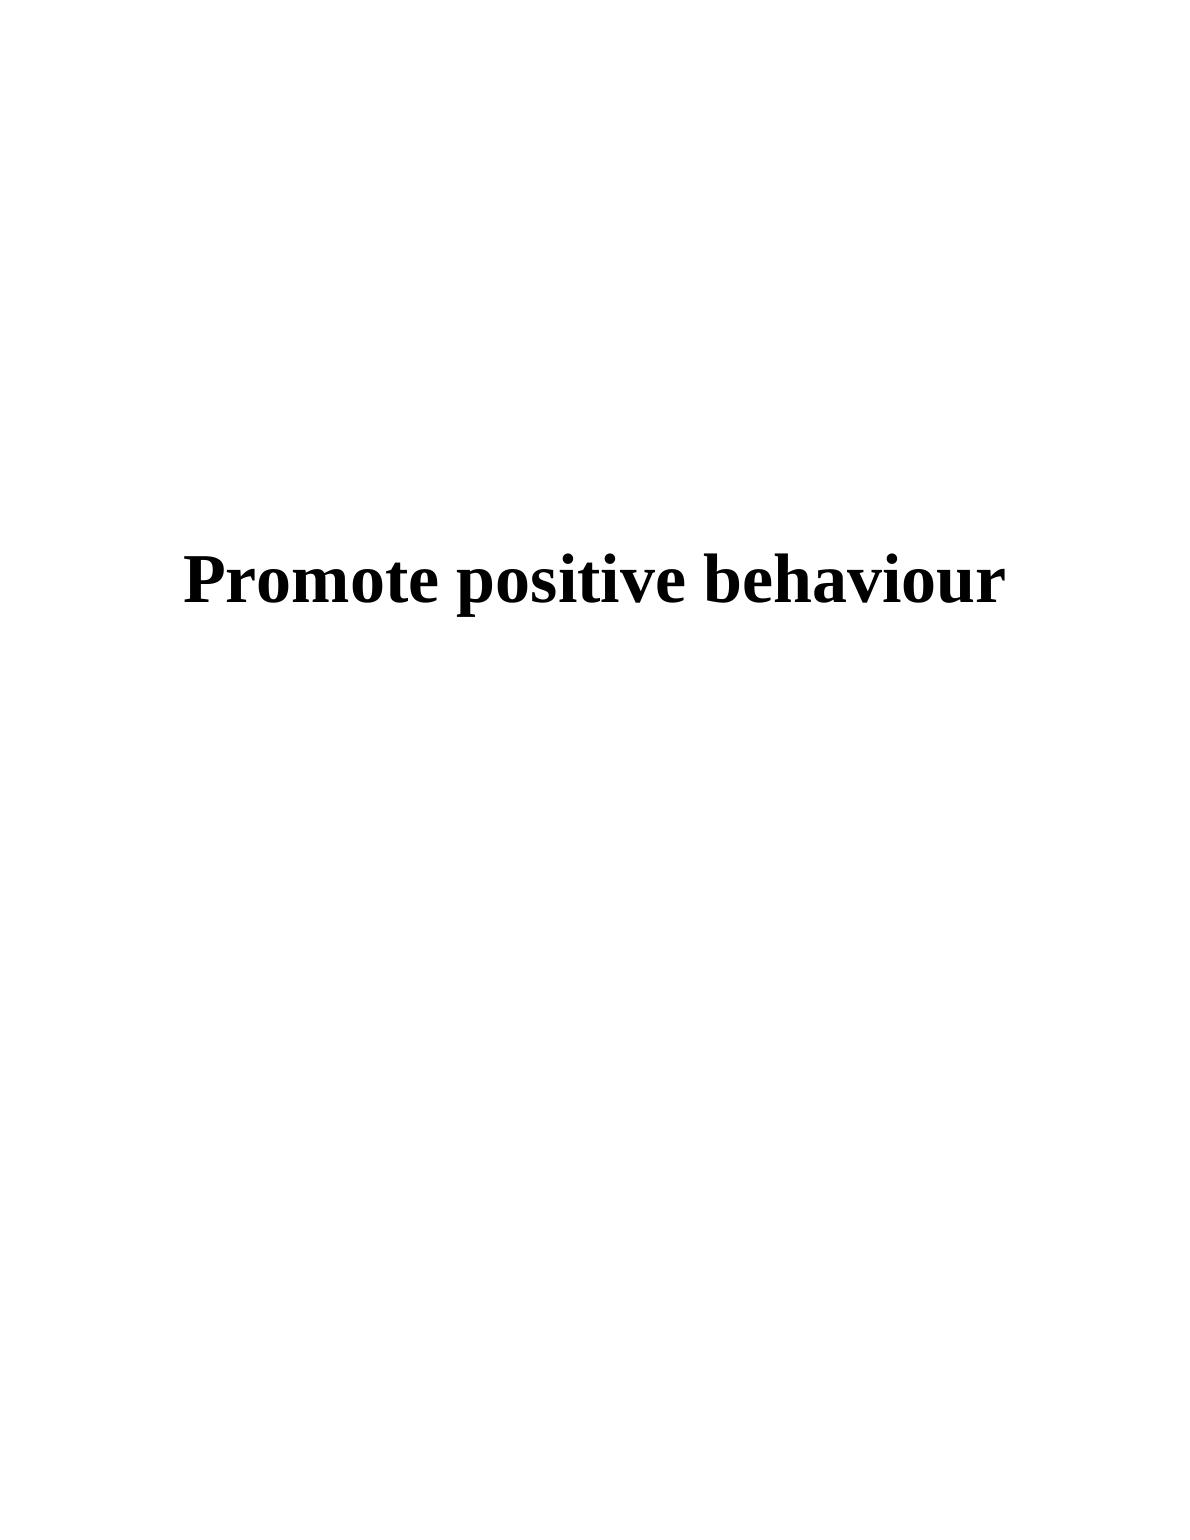 Promote Positive Behaviour in Health and Social Care Sector_1